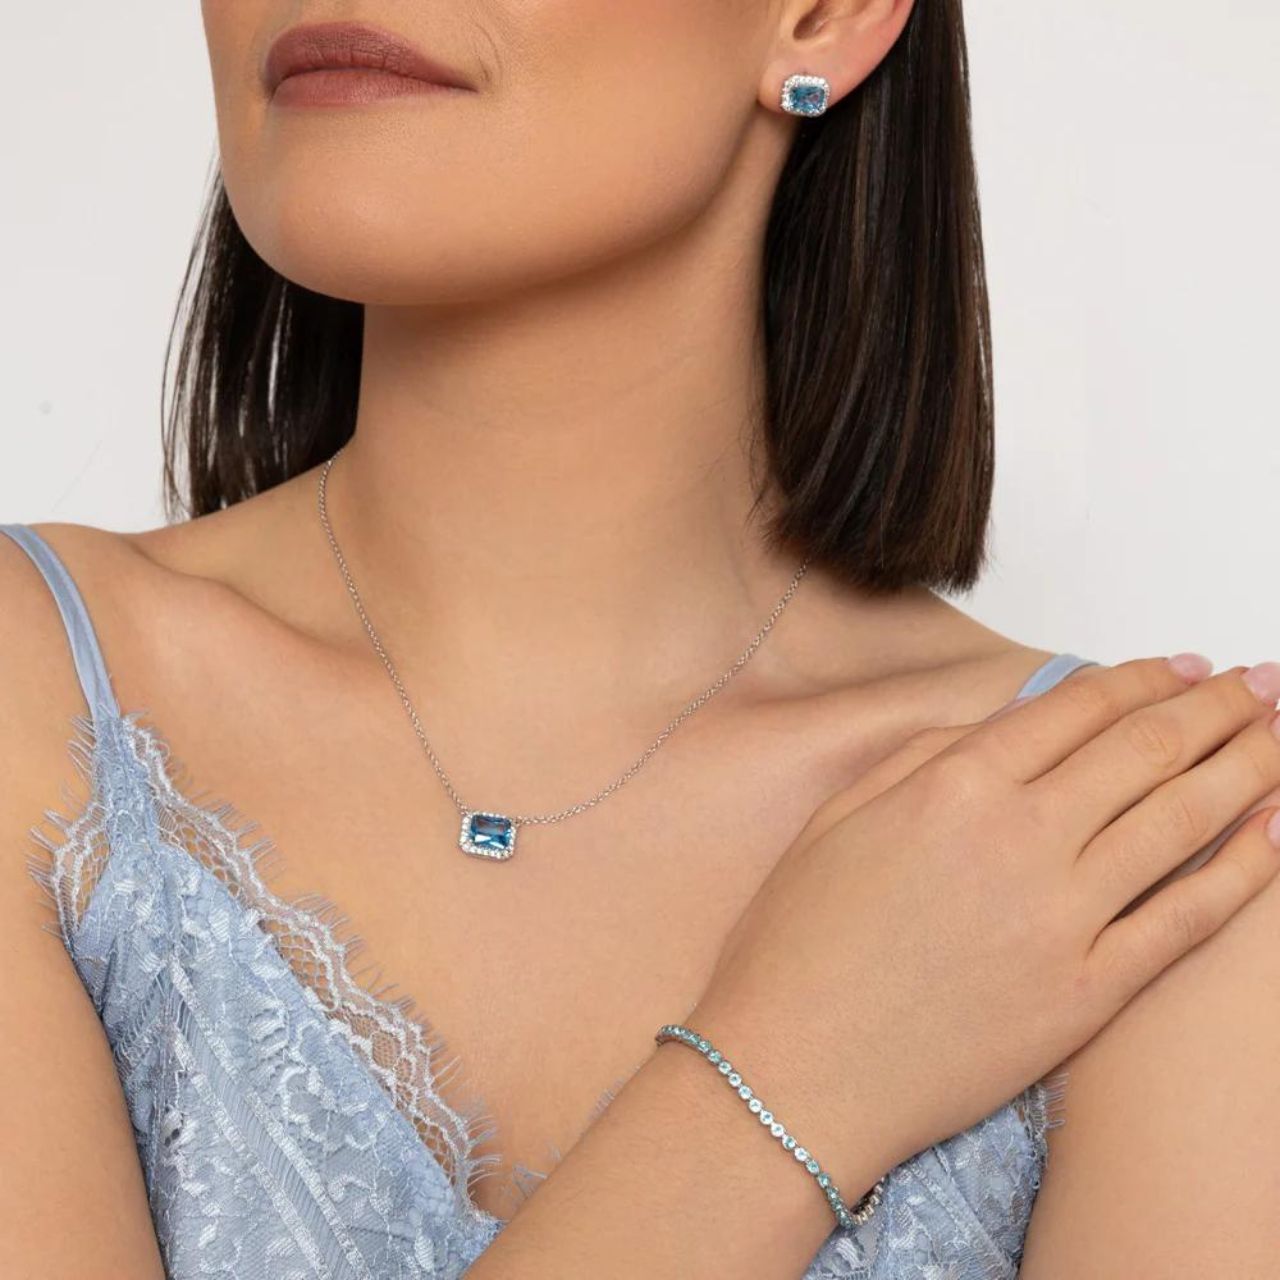 This Knight & Day necklace features a silver-plated design adorned with a horizontal light blue crystal. With its elegant and understated design, this necklace adds a touch of sparkle to any outfit. Made with quality materials and expert craftsmanship, it's a perfect accessory for any occasion.